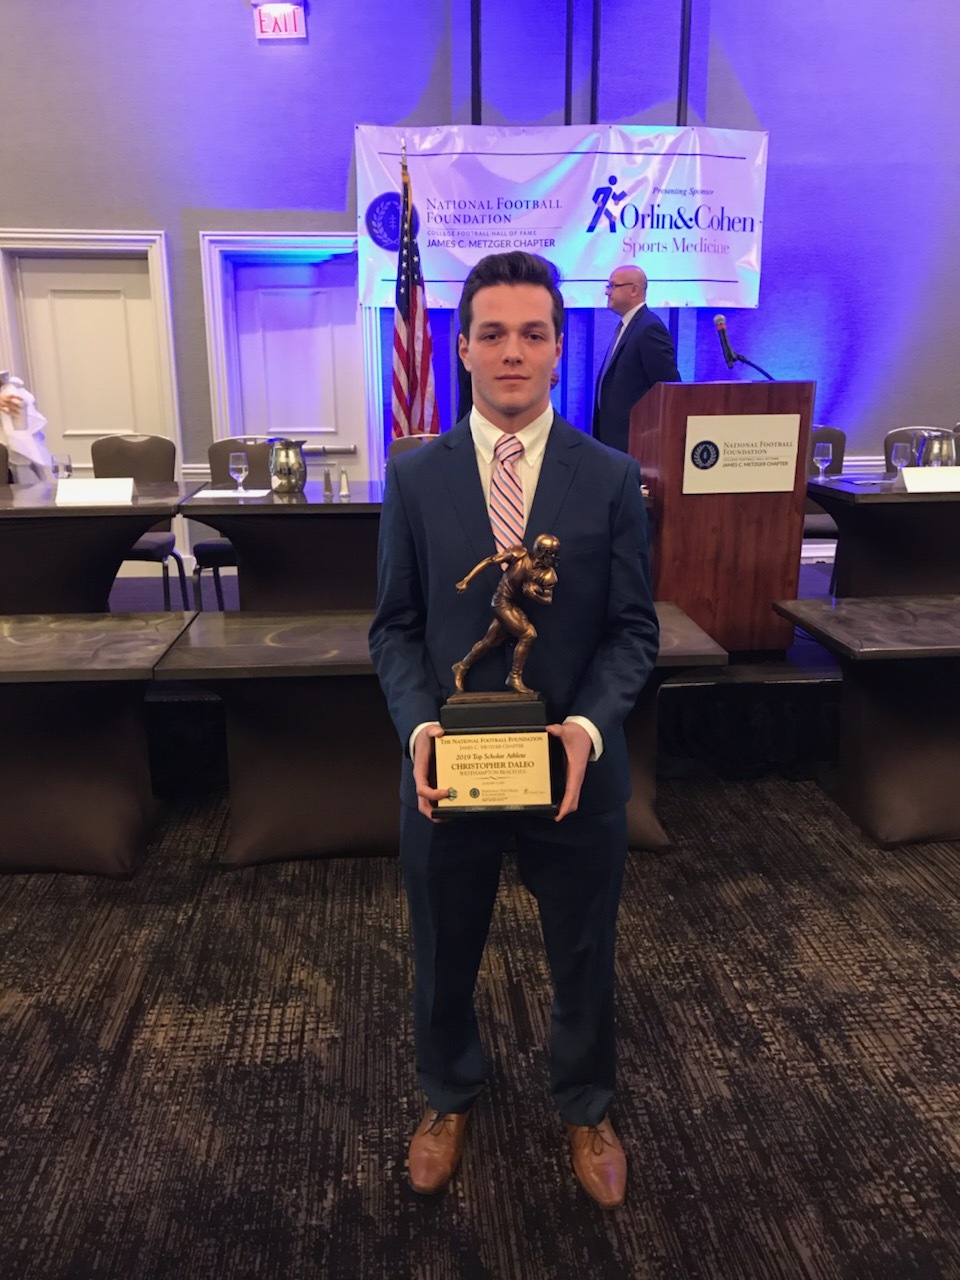 Chris Daleo of Westhampton Beach was given the James C. Metzger Award as the top academic football player in Suffolk County.